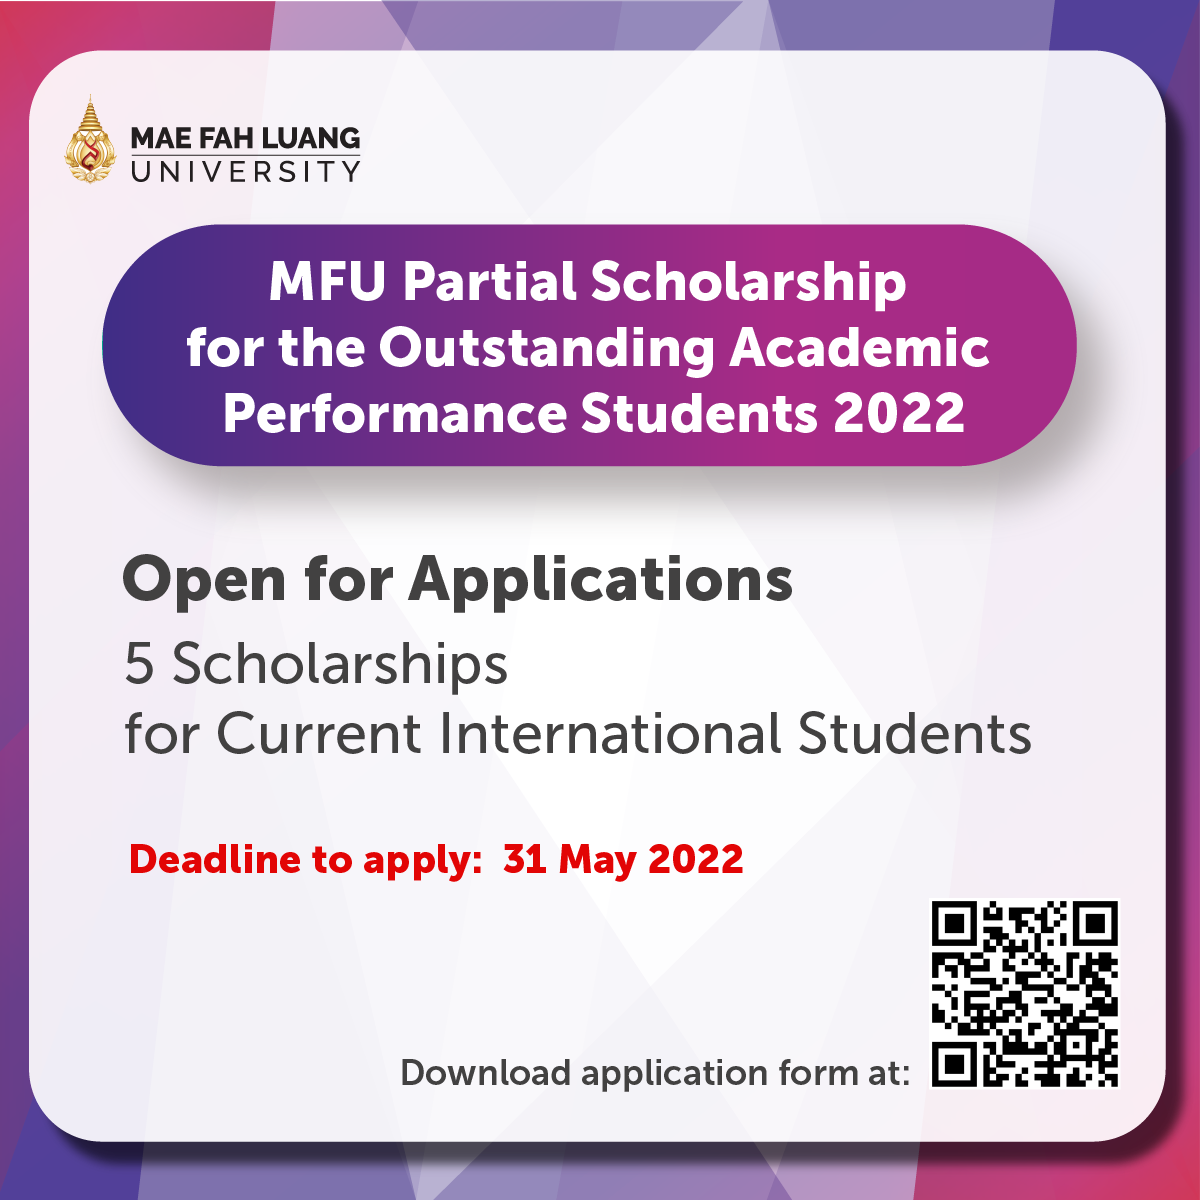 MFU Partial Scholarship for the Outstanding Academic Performance Students 2022